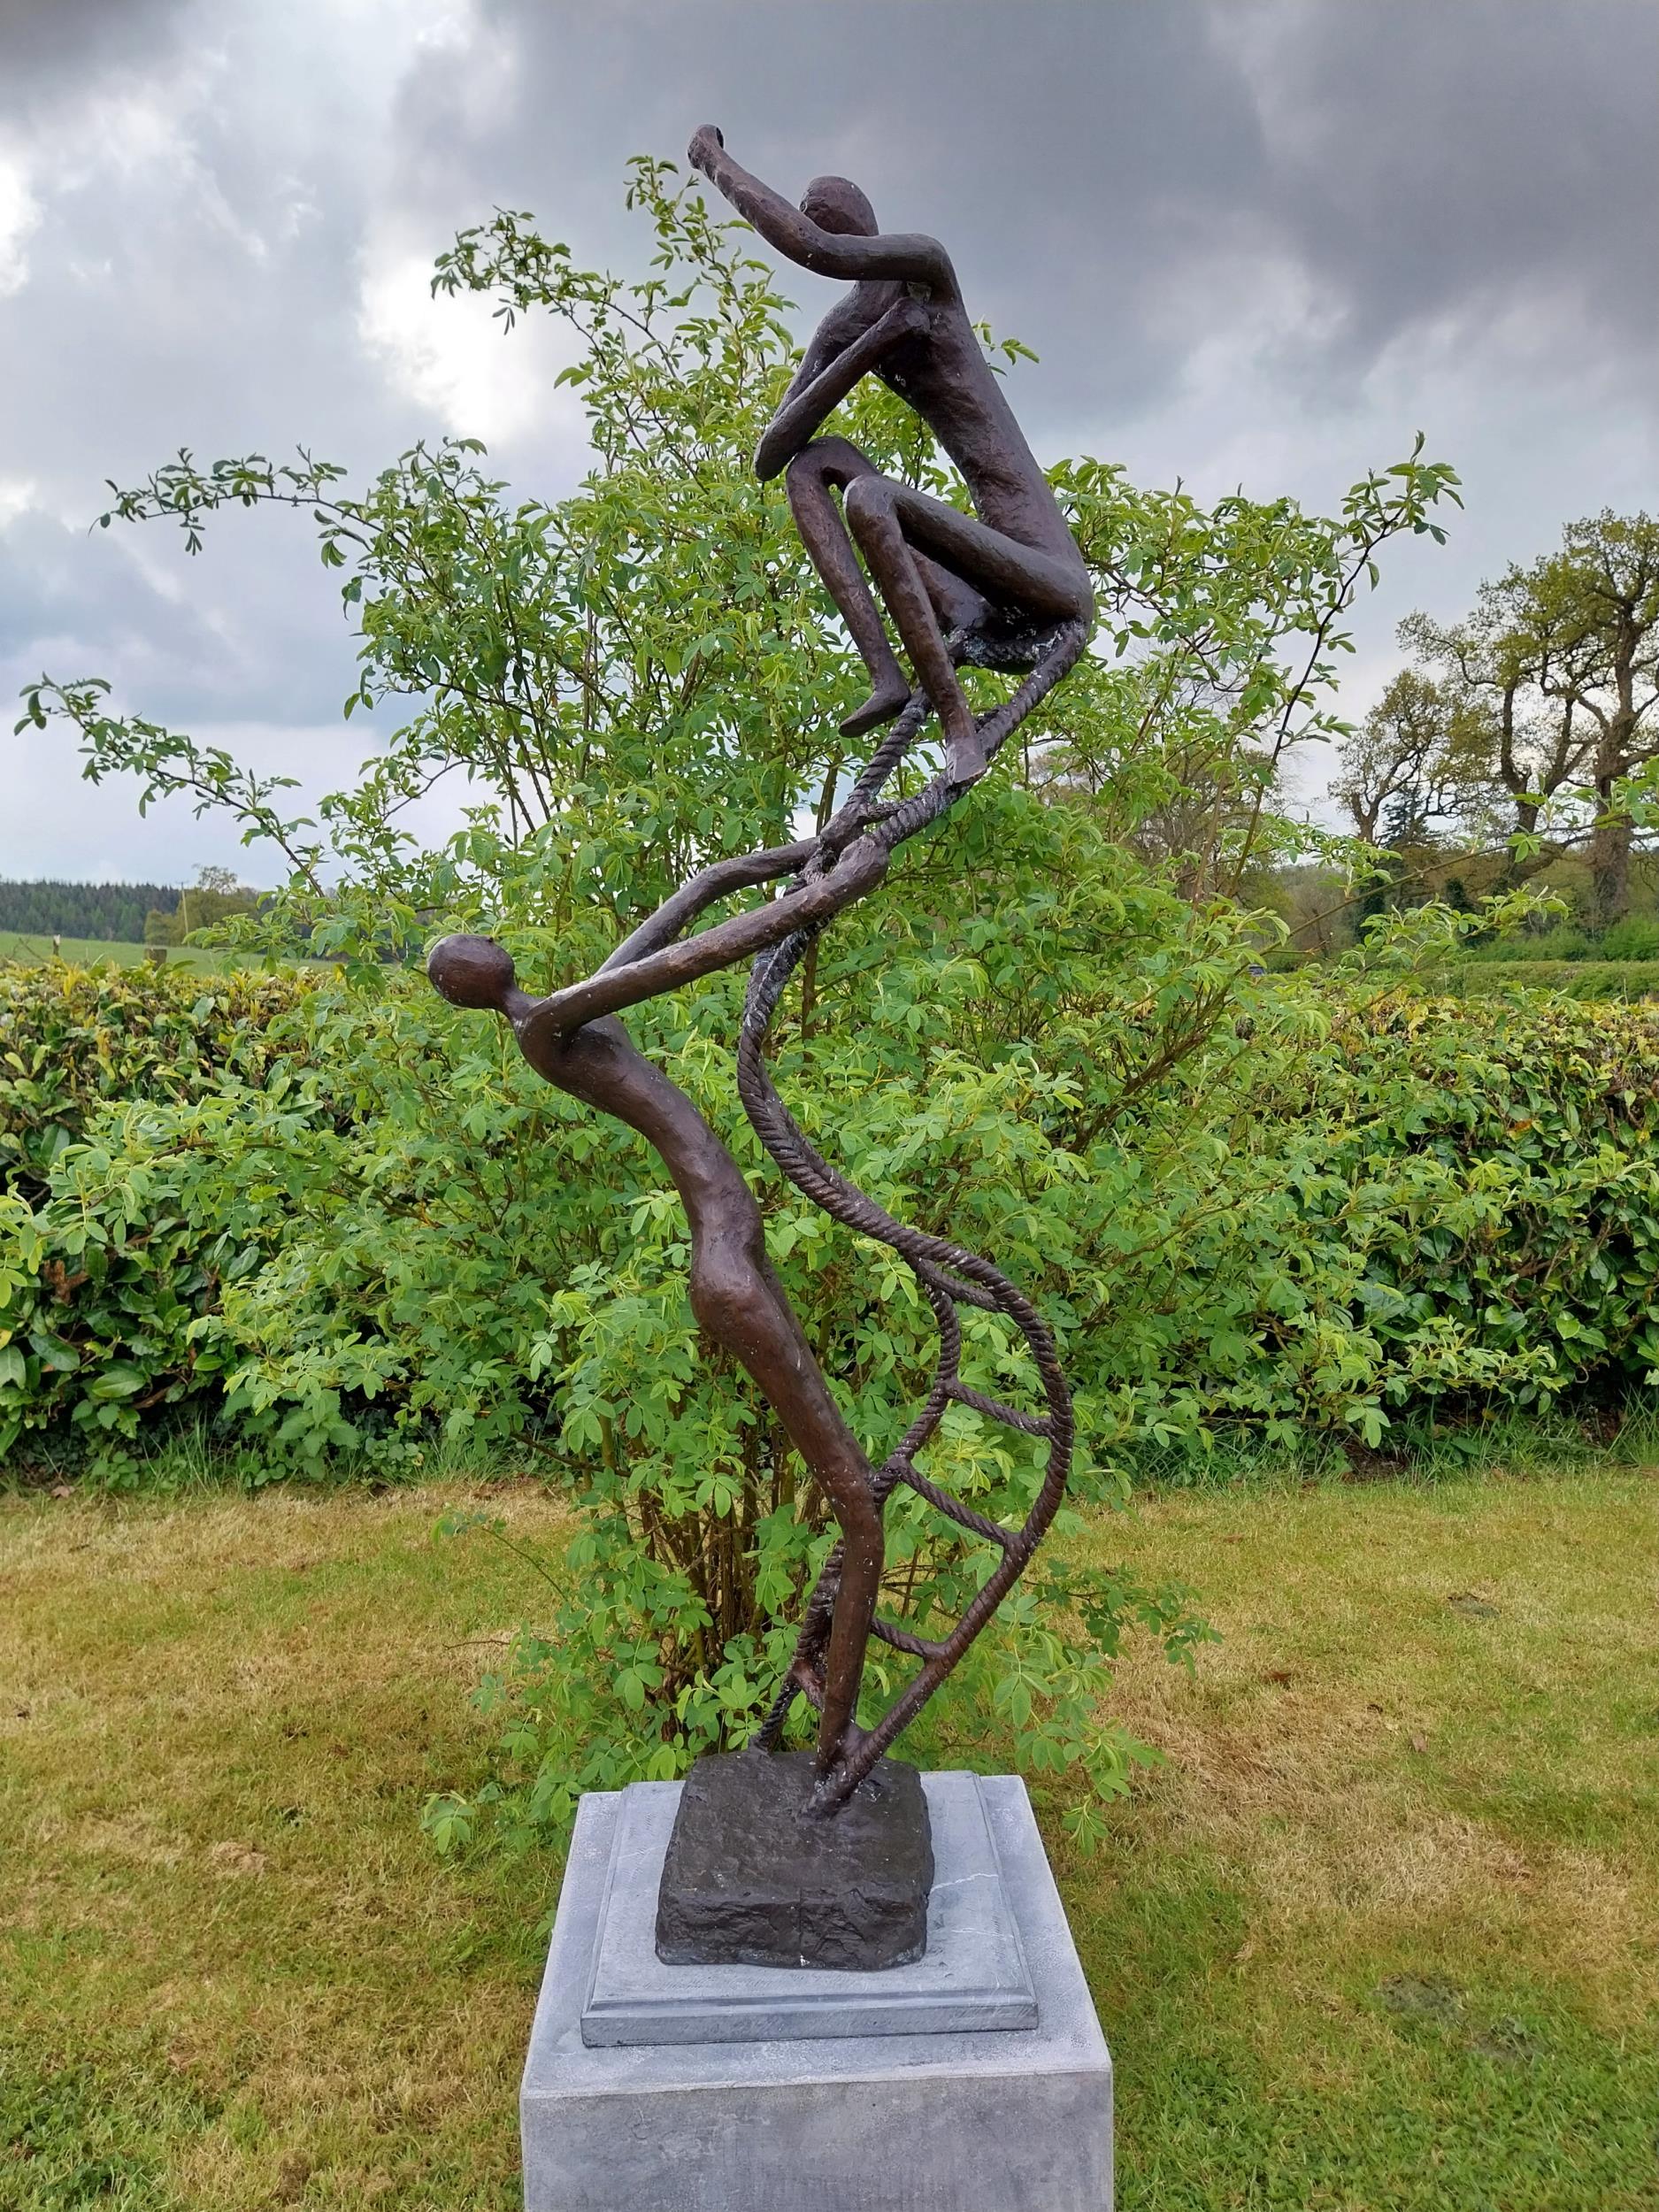 Exceptional quality contemporary bronze sculpture 'The Rope Climbing Acrobats' raised on slate - Image 3 of 7